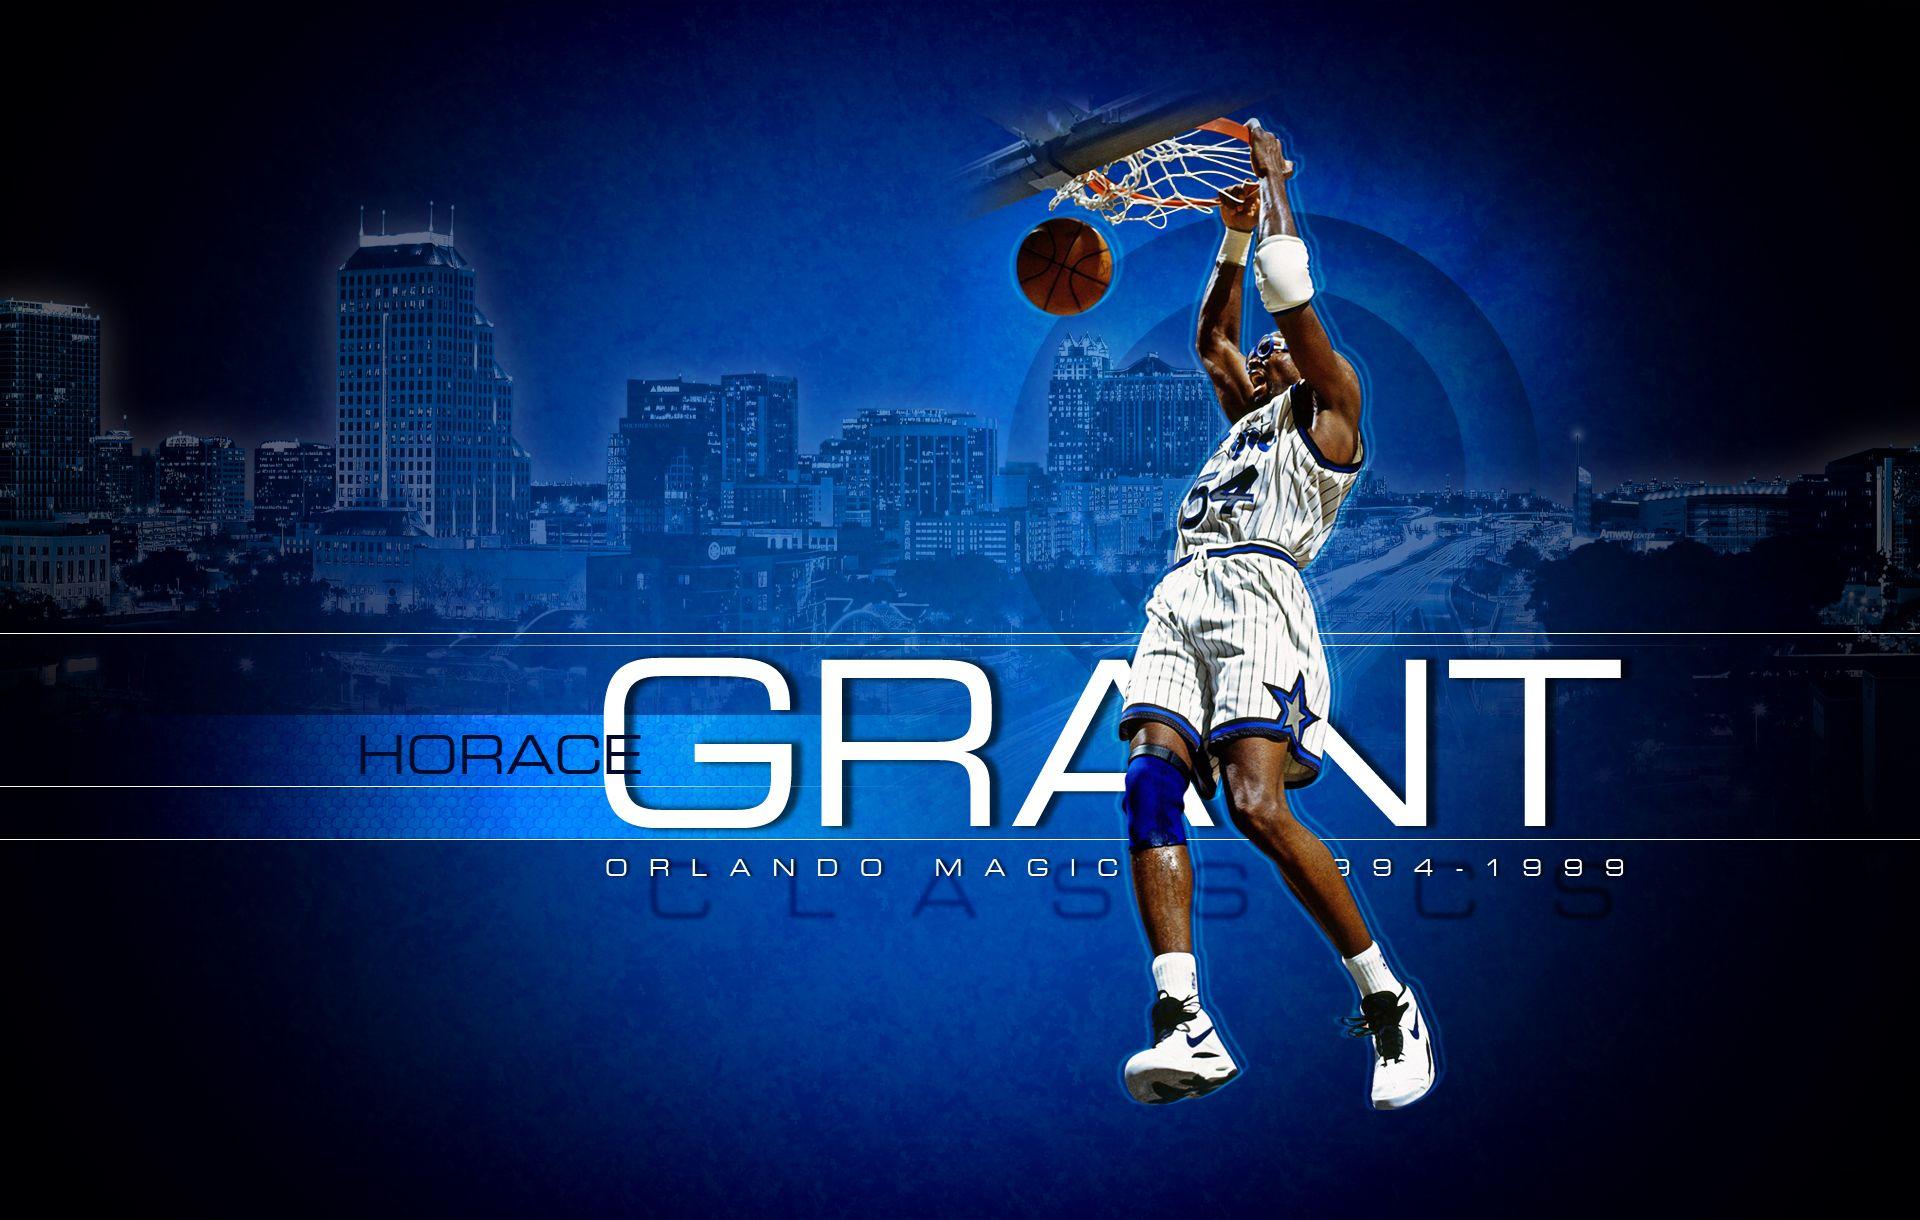 Magic Throwback Wallpaper. THE OFFICIAL SITE OF THE ORLANDO MAGIC